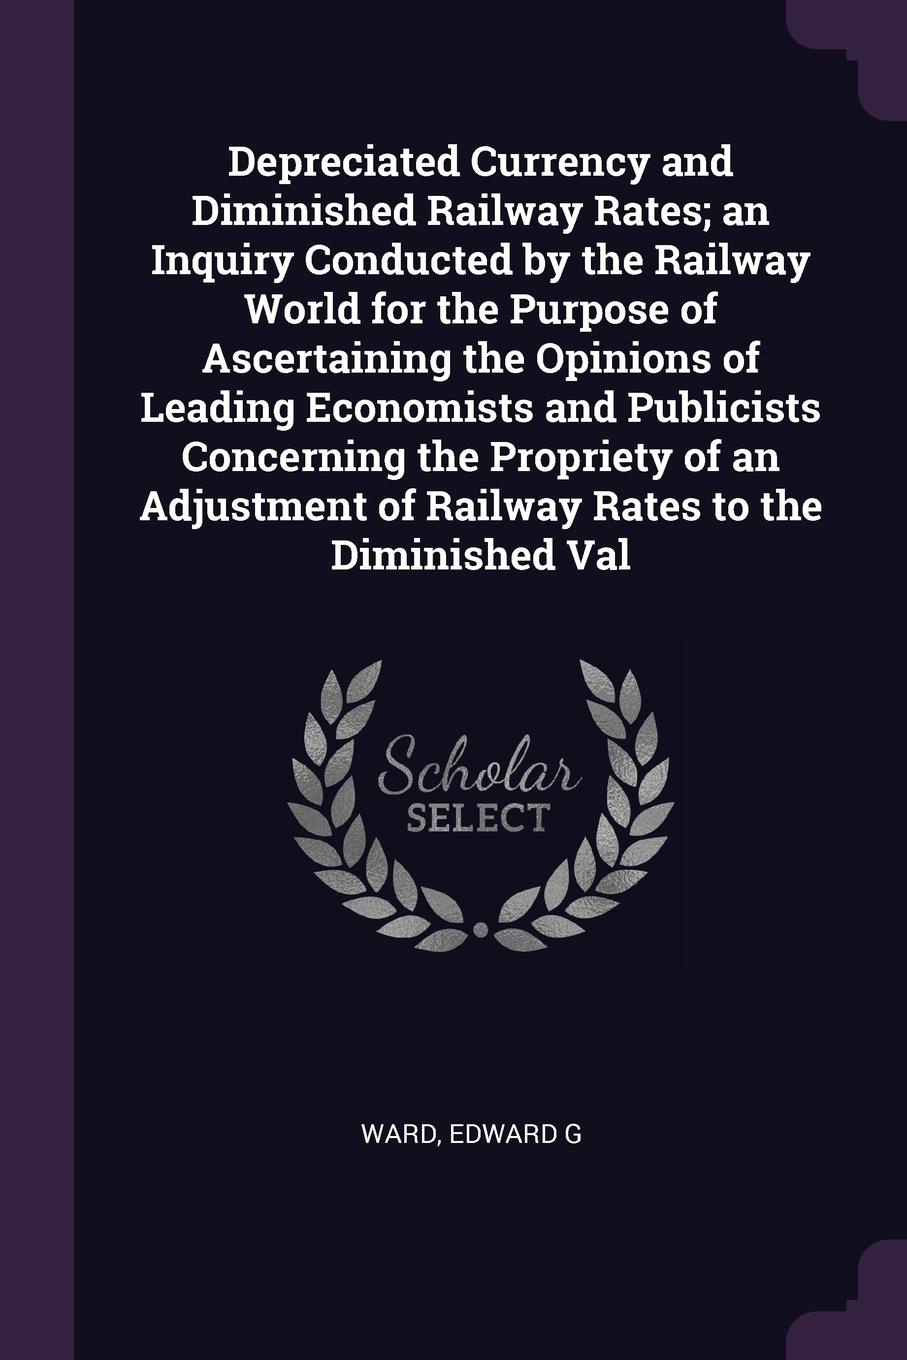 Depreciated Currency and Diminished Railway Rates; an Inquiry Conducted by the Railway World for the Purpose of Ascertaining the Opinions of Leading Economists and Publicists Concerning the Propriety of an Adjustment of Railway Rates to the Dimini...